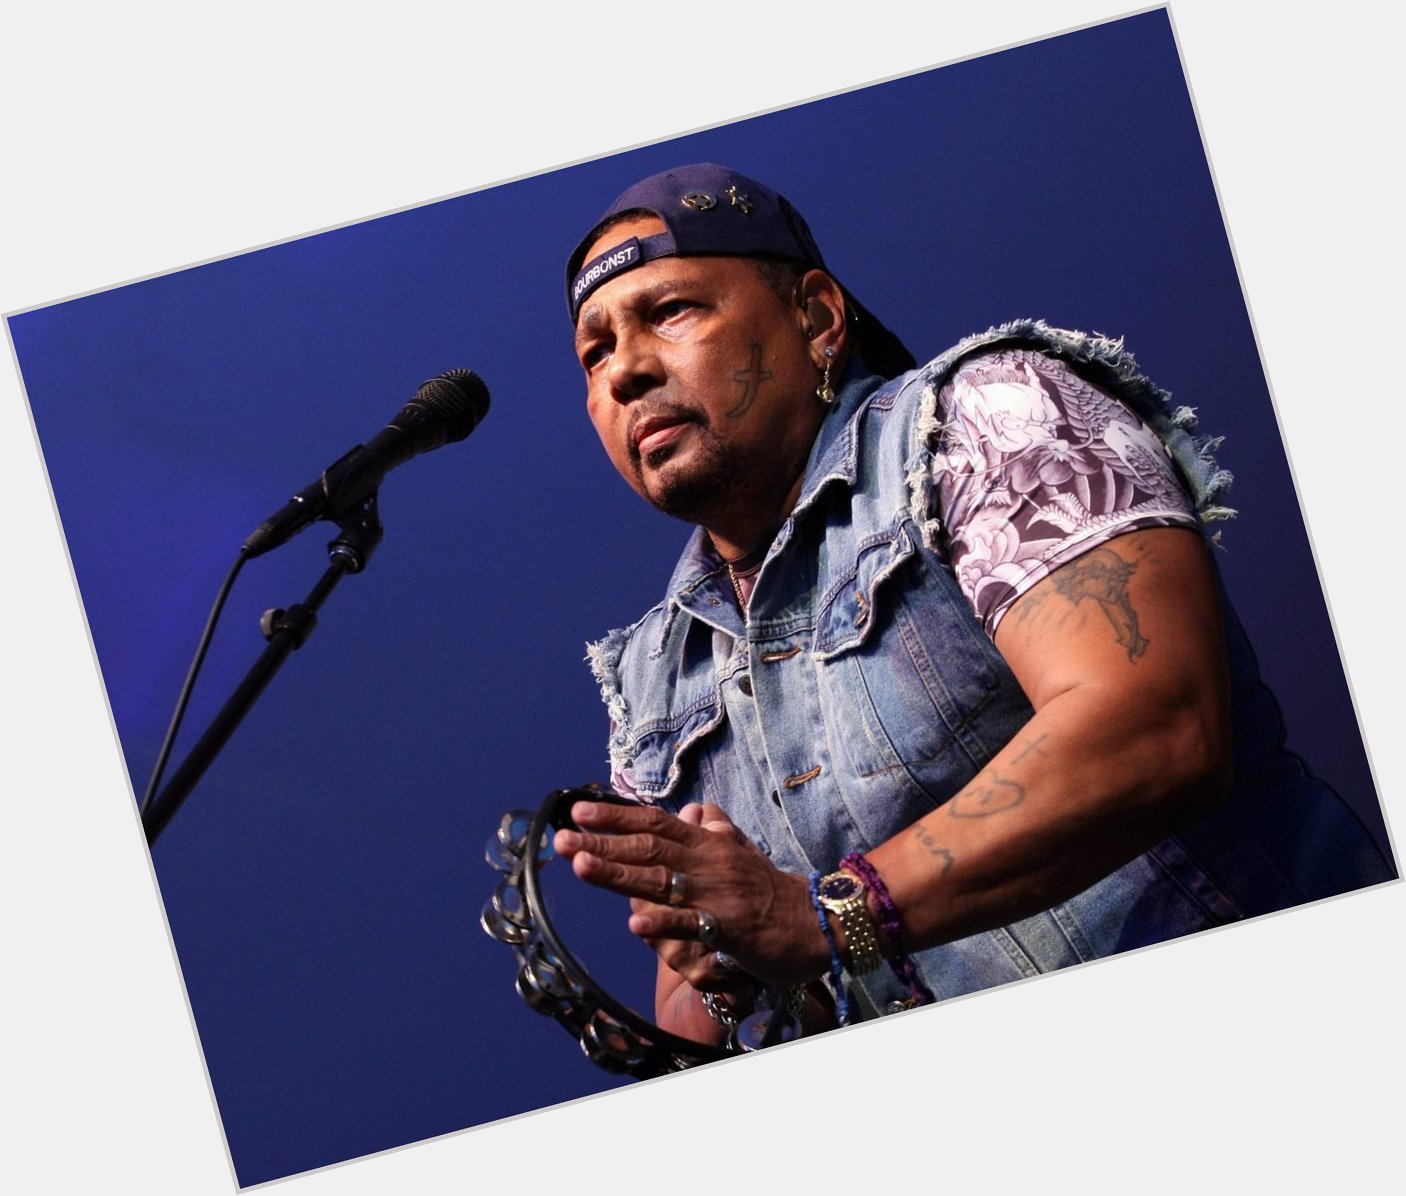 Let\s tell it like it is - Aaron Neville turns 81 today! Happy Birthday from Nashville. 